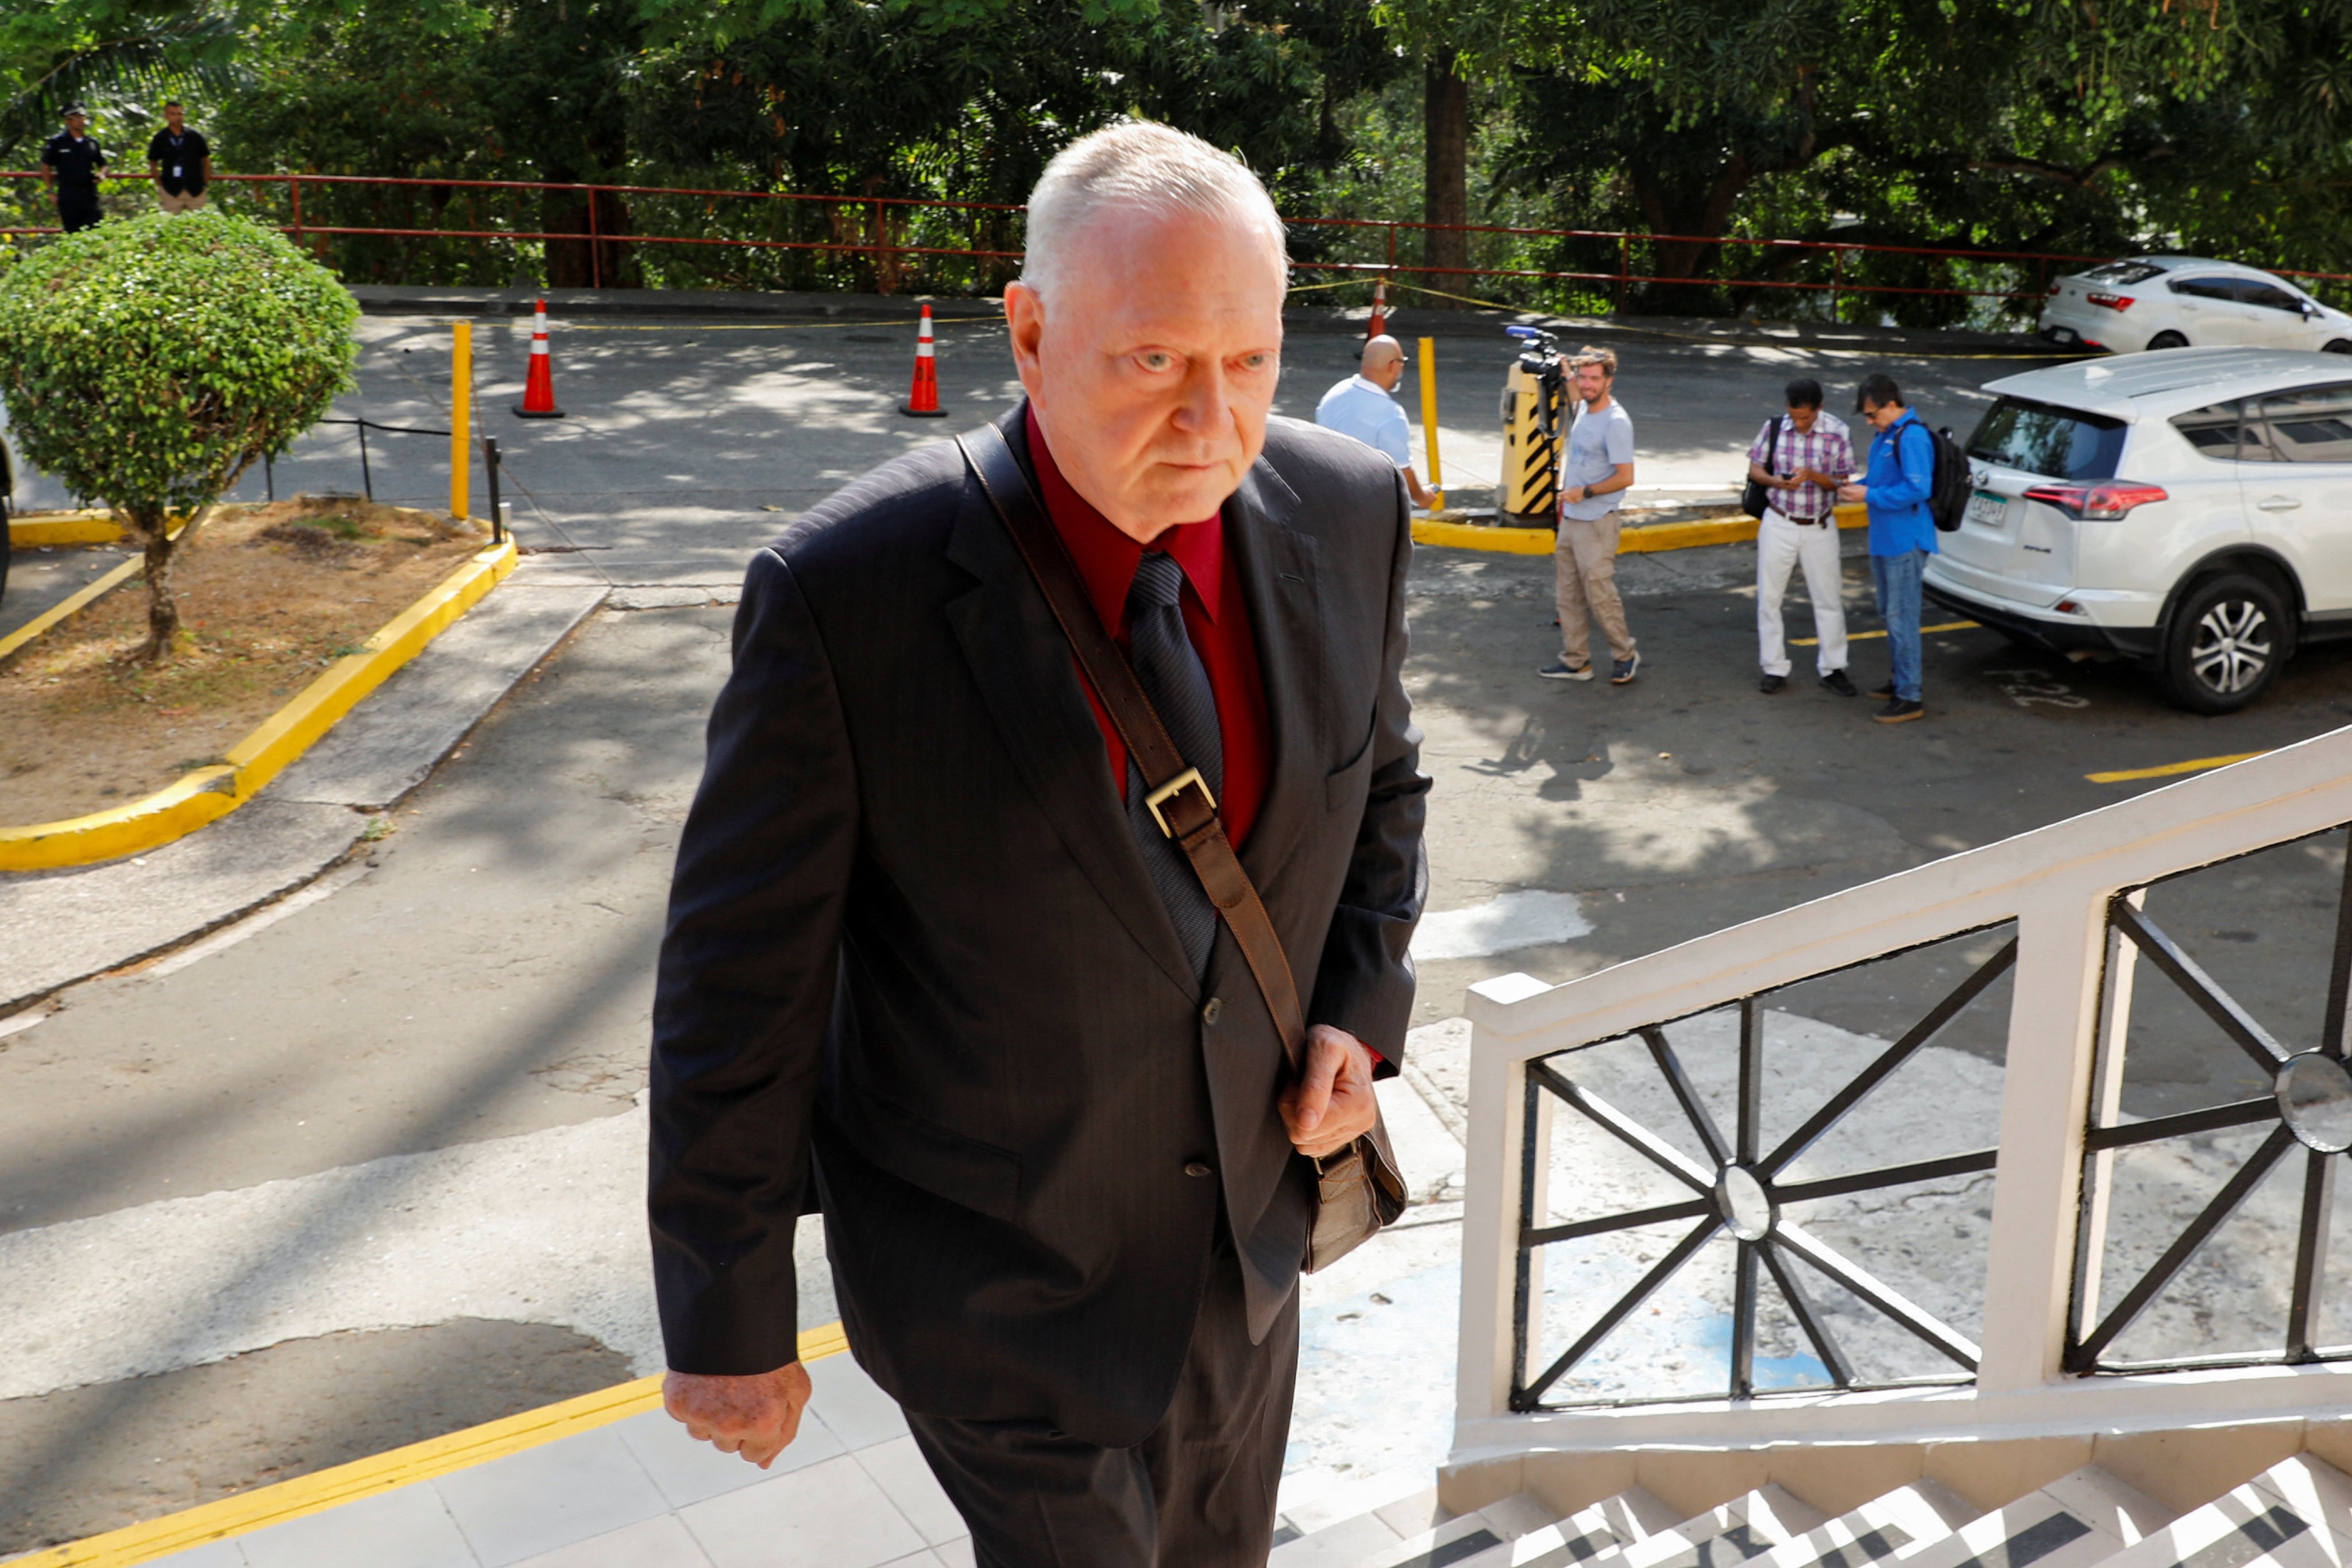 Jurgen Rolf Dieter Mossack, co-founder of former law firm Mossack Fonseca, arrives at the Panamanian Supreme Court of Justice in Panama City, Panama on Monday. Photo: Reuters